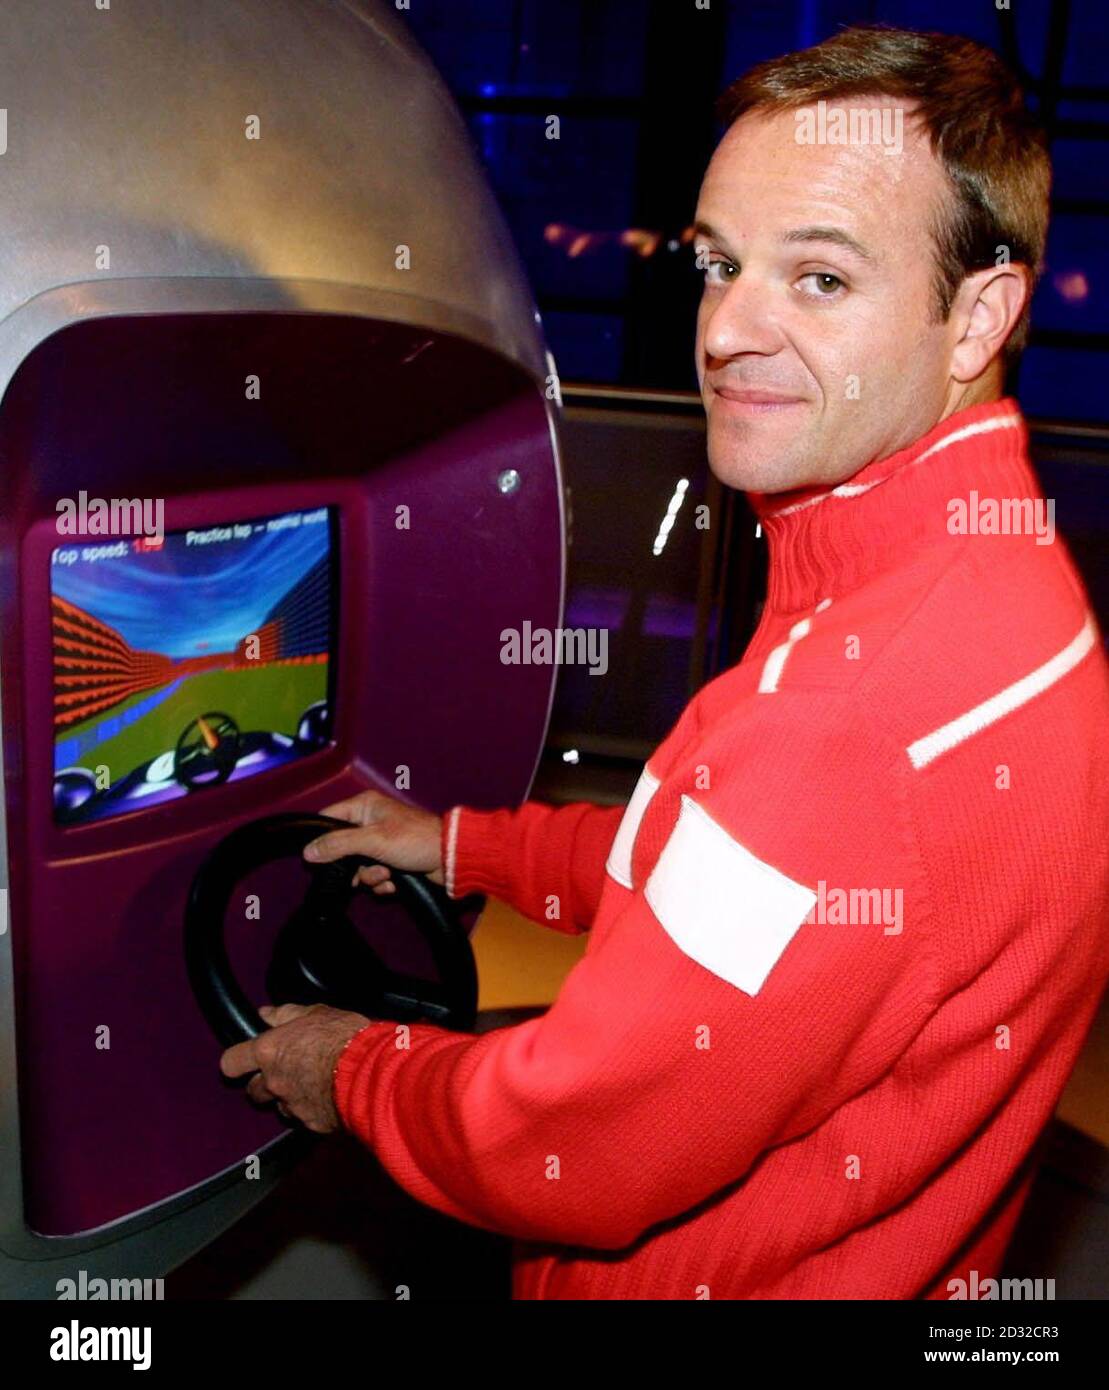 Ferrari Formula One racing driver Rubens Barrichello tries his skills on a computer driving game during a visit to the Alfa Romeo: Sustaining Beauty-90 years of art in engineering, at the Science Museum in London. Stock Photo